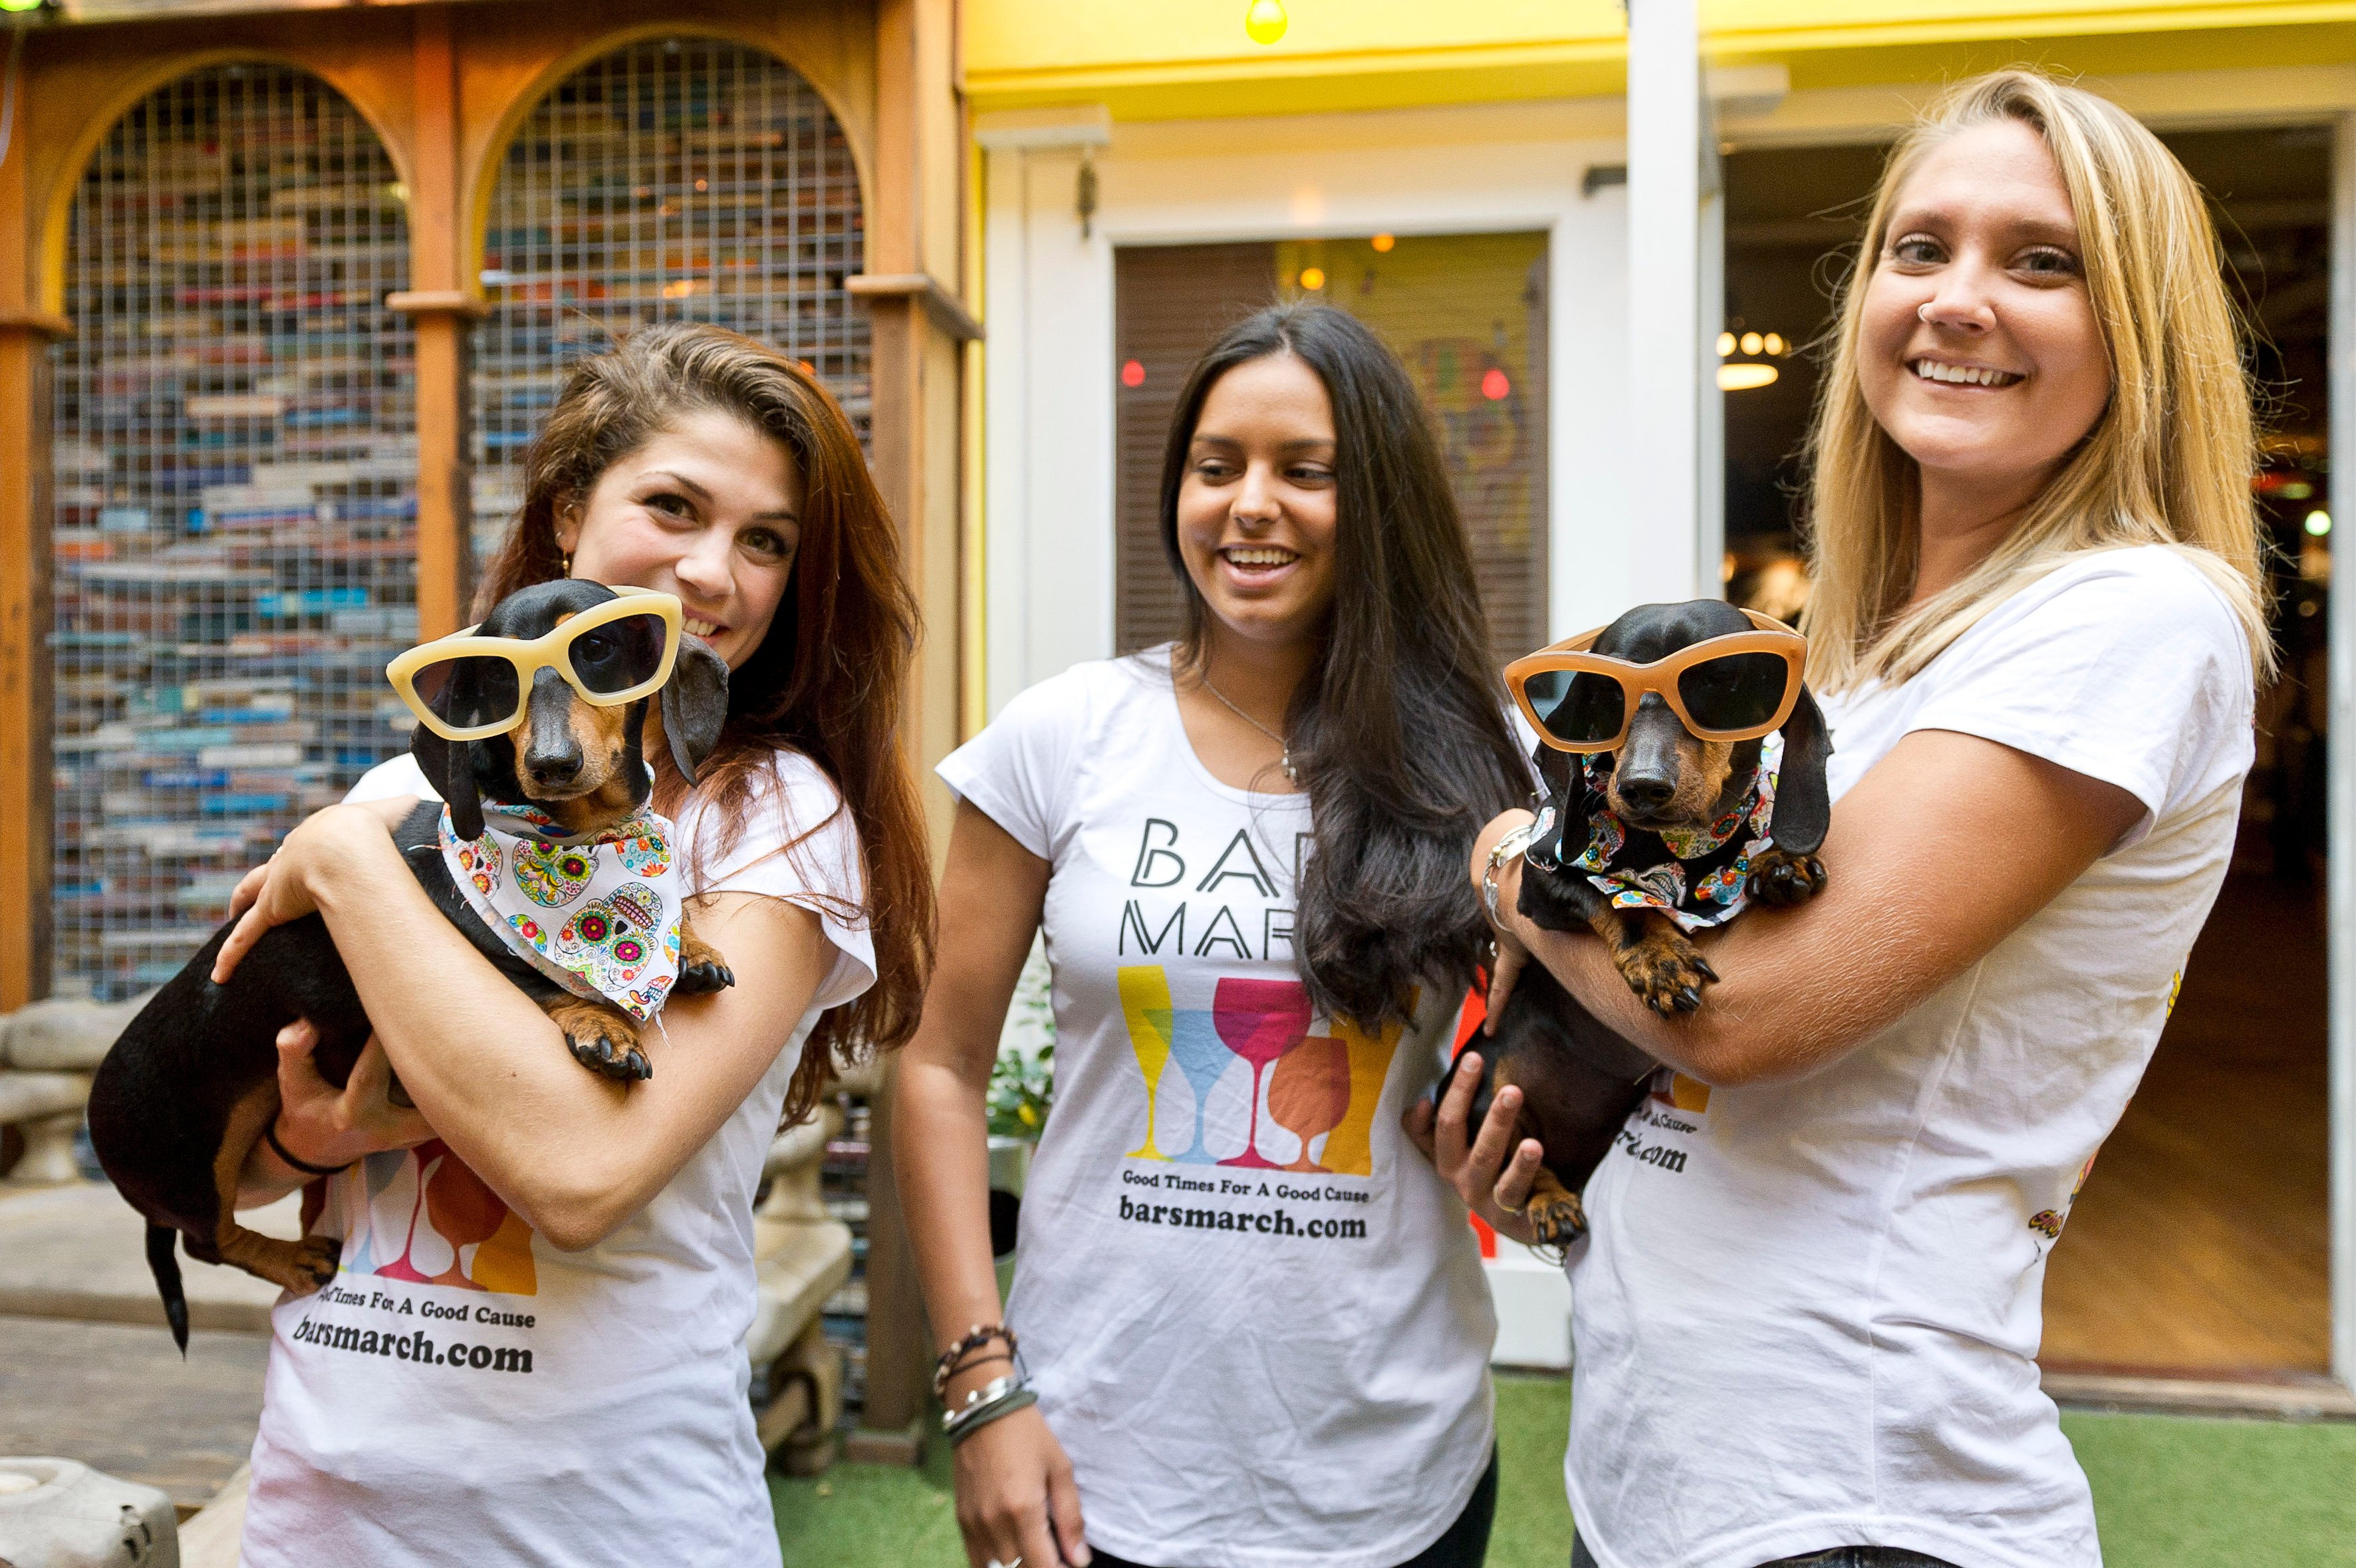 Three women, two are holding sausage dogs with oversizes sunglasses